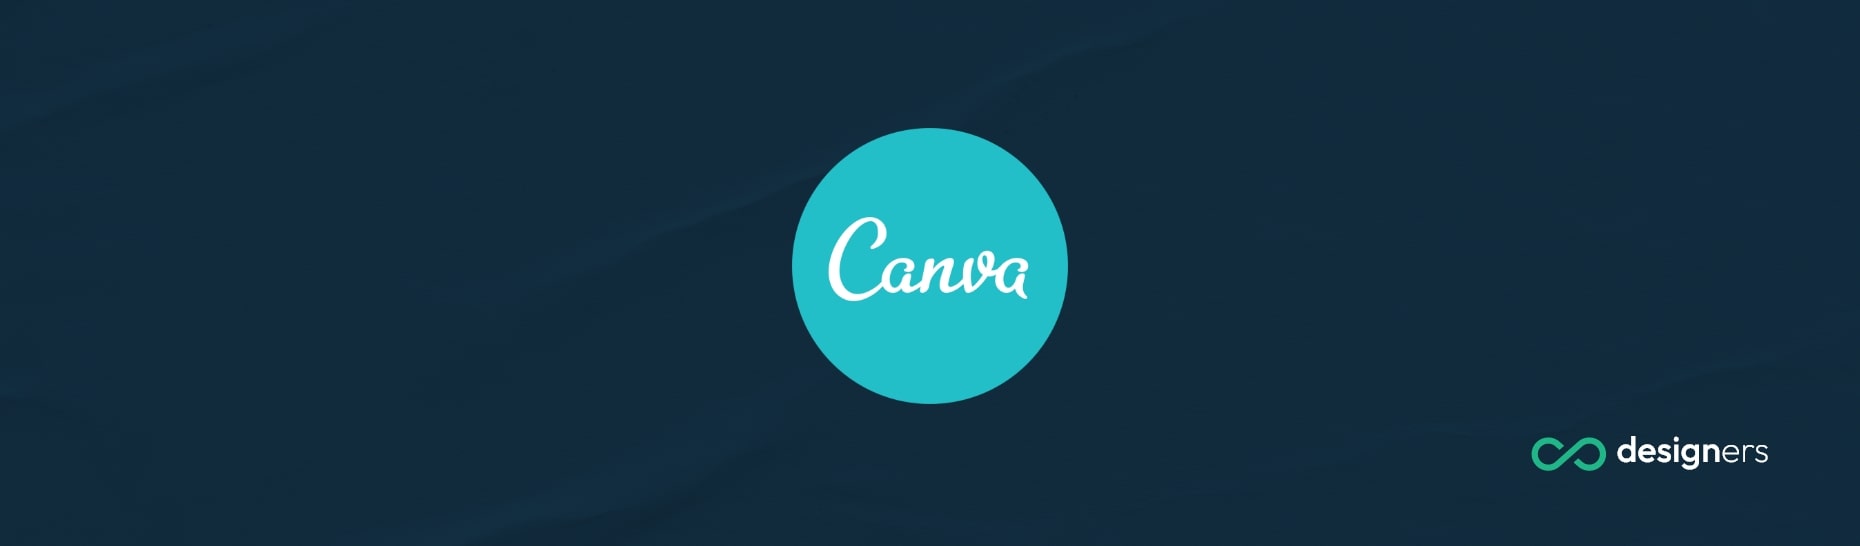 What Size Are the Invitations on Canva?